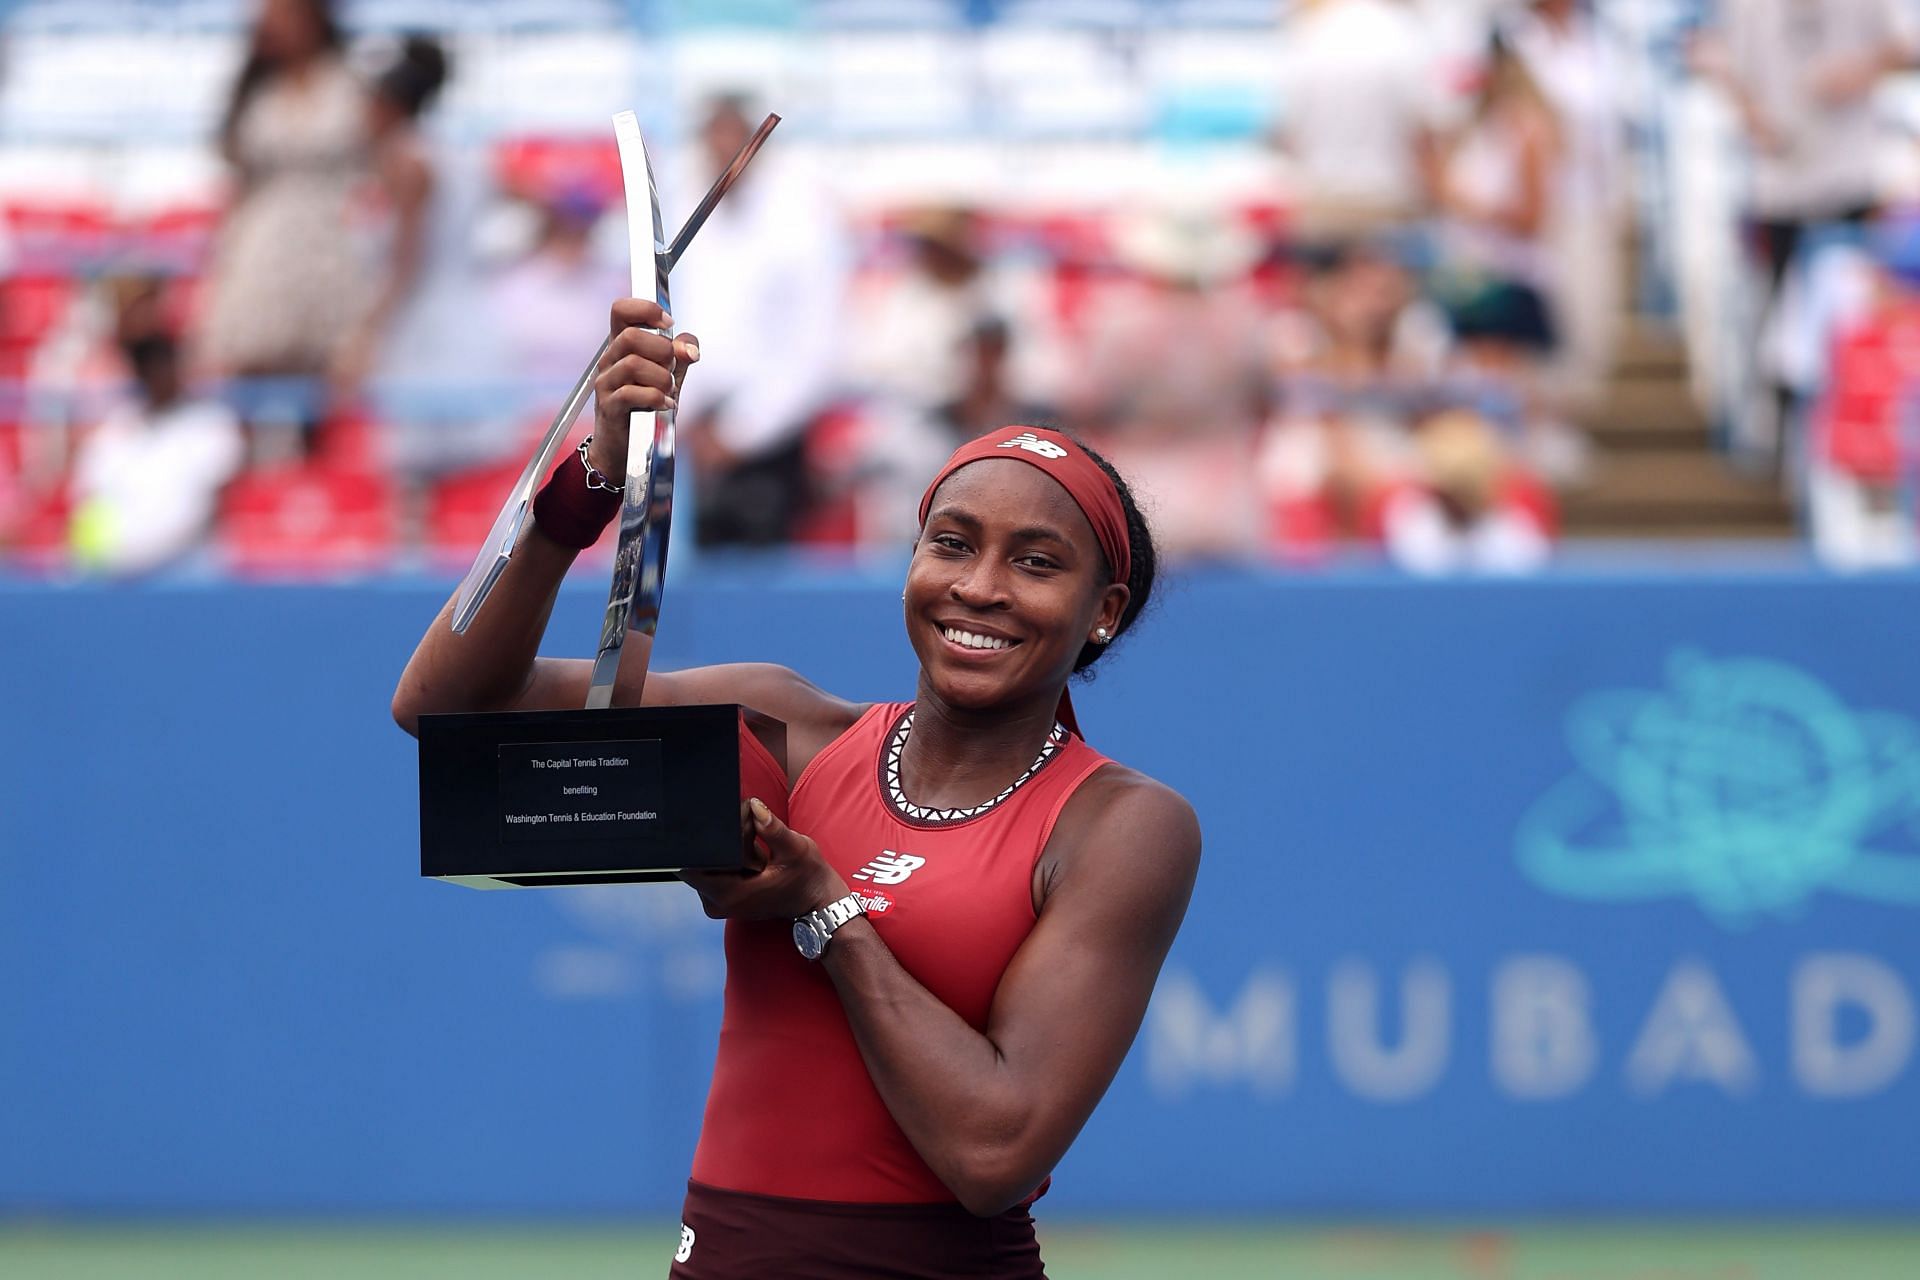 Coco Gauff with the Citi Open trophy